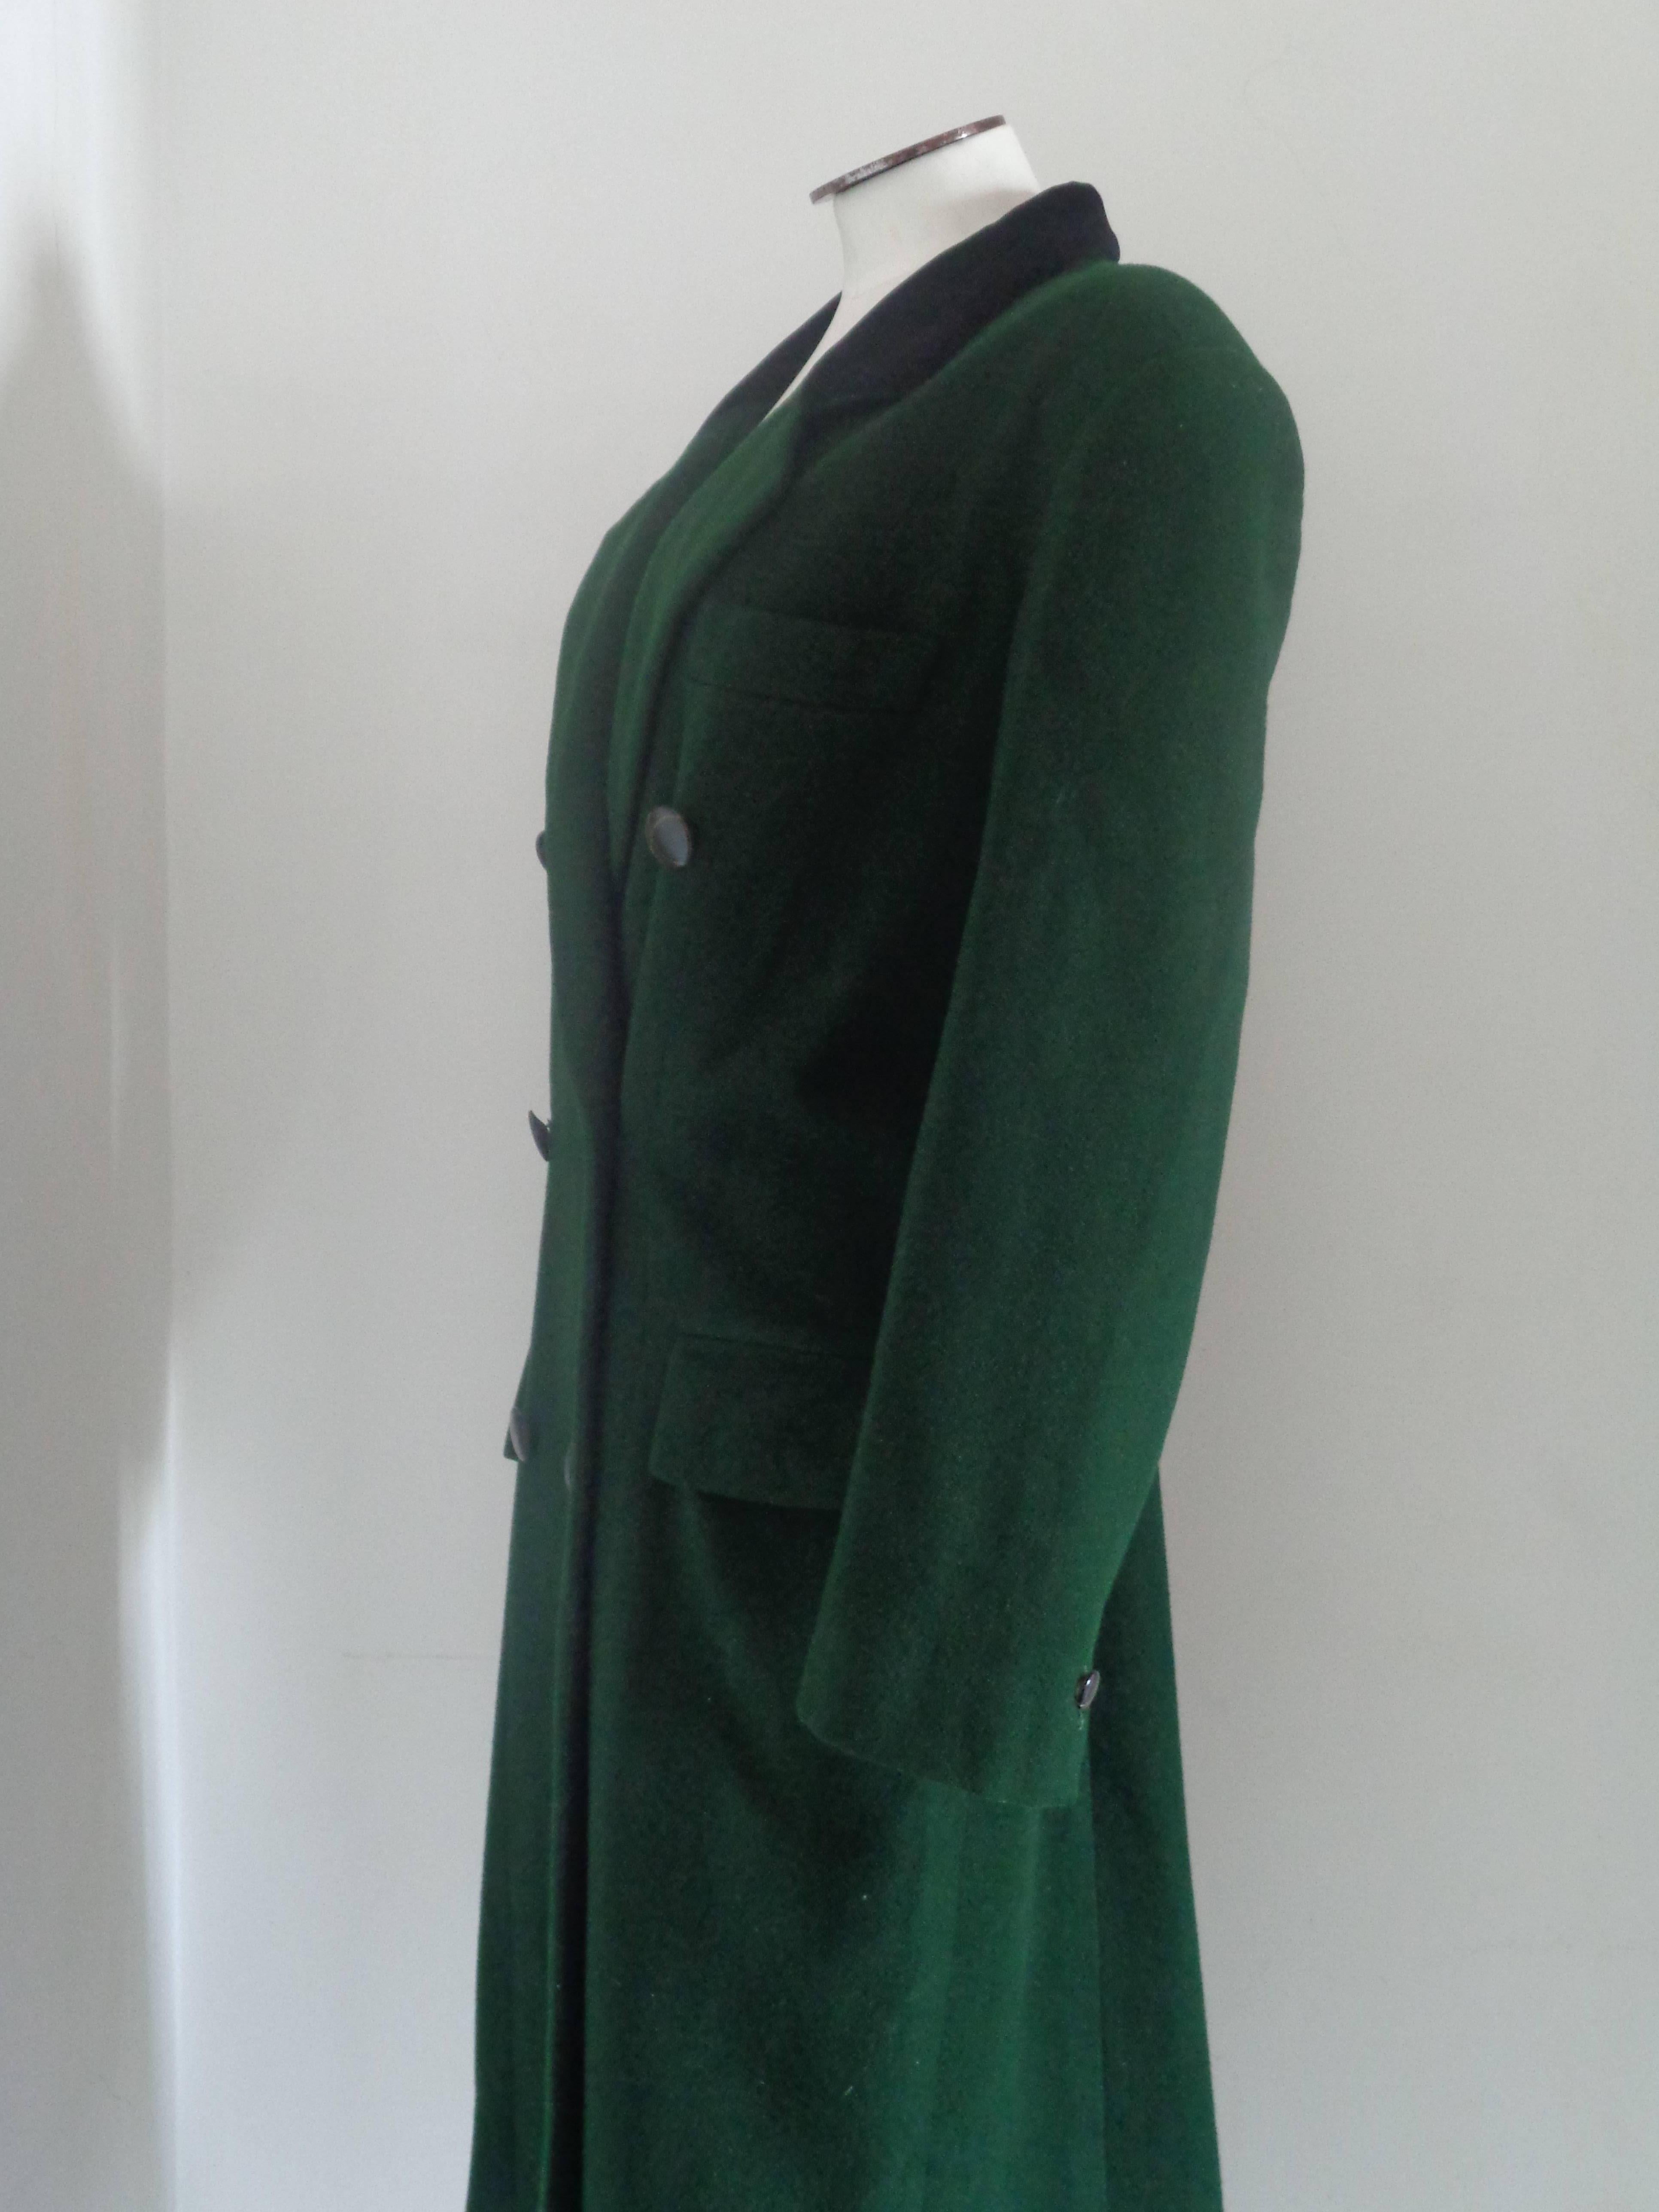 Valentino Green Wool Coat

Totally made in italy in size M / L 